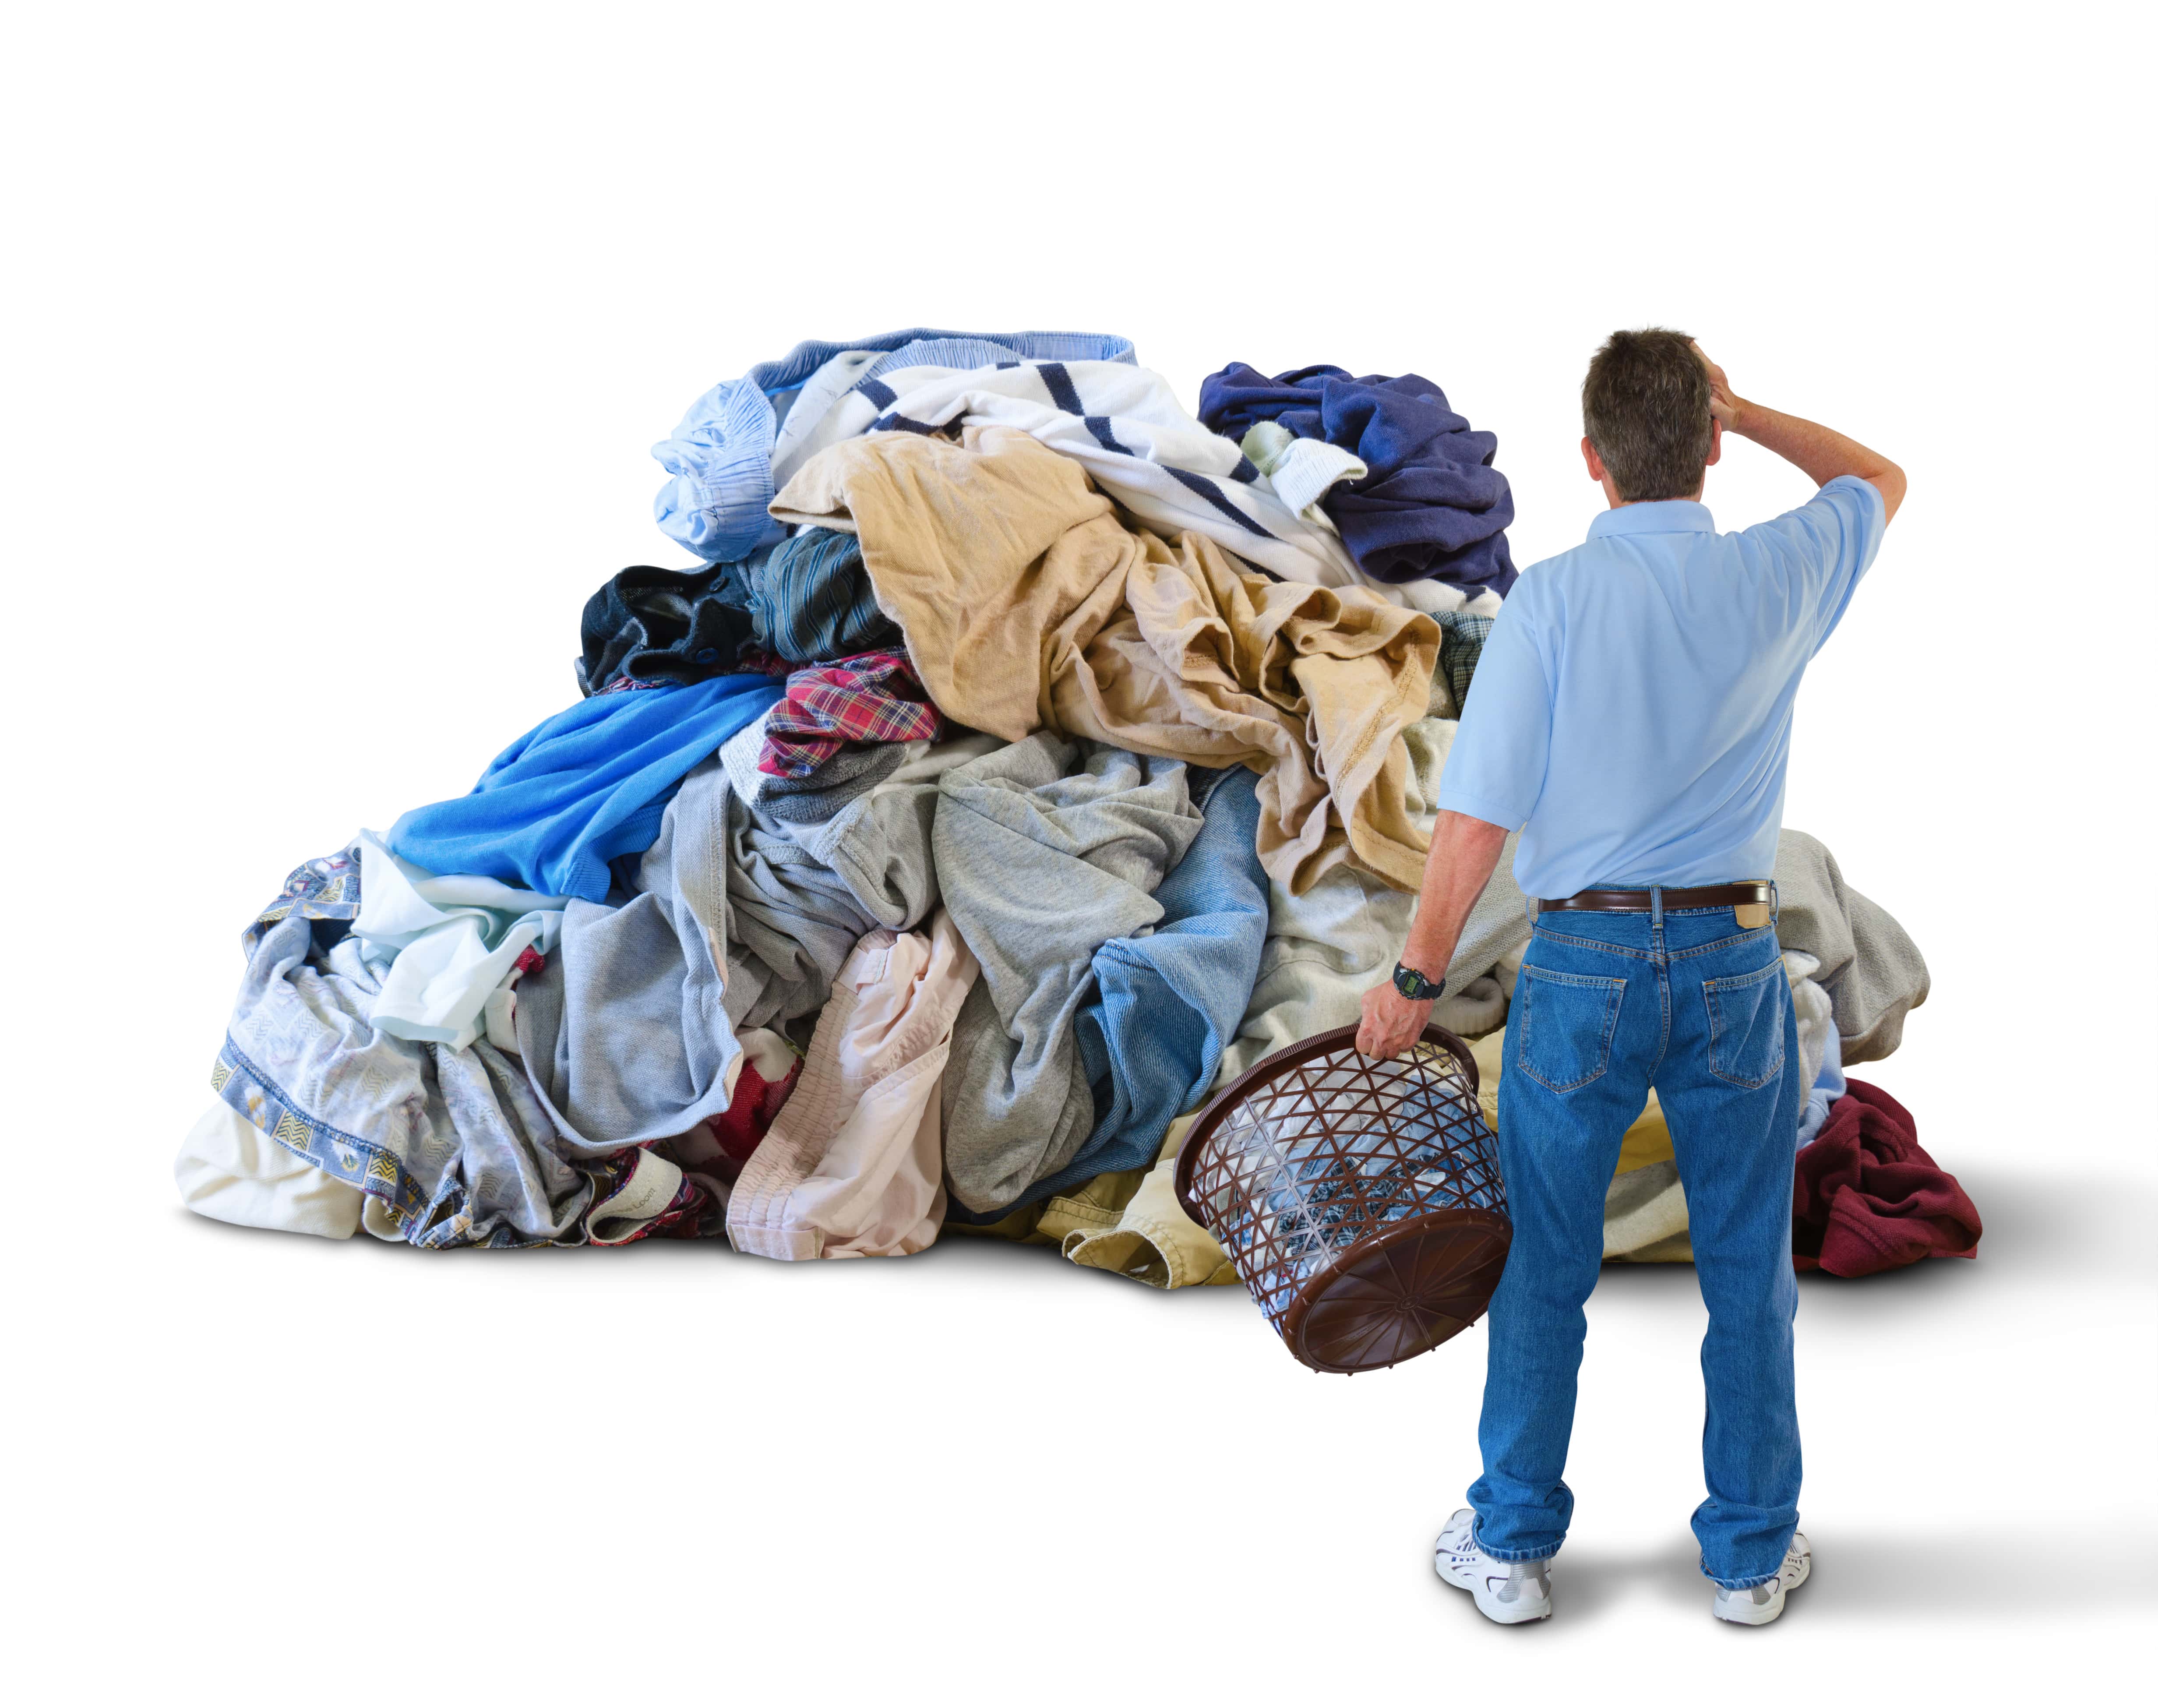 A distraught man with his hand to his head and a laundry basket in his hand is standing in front of a giant pile of dirty close.